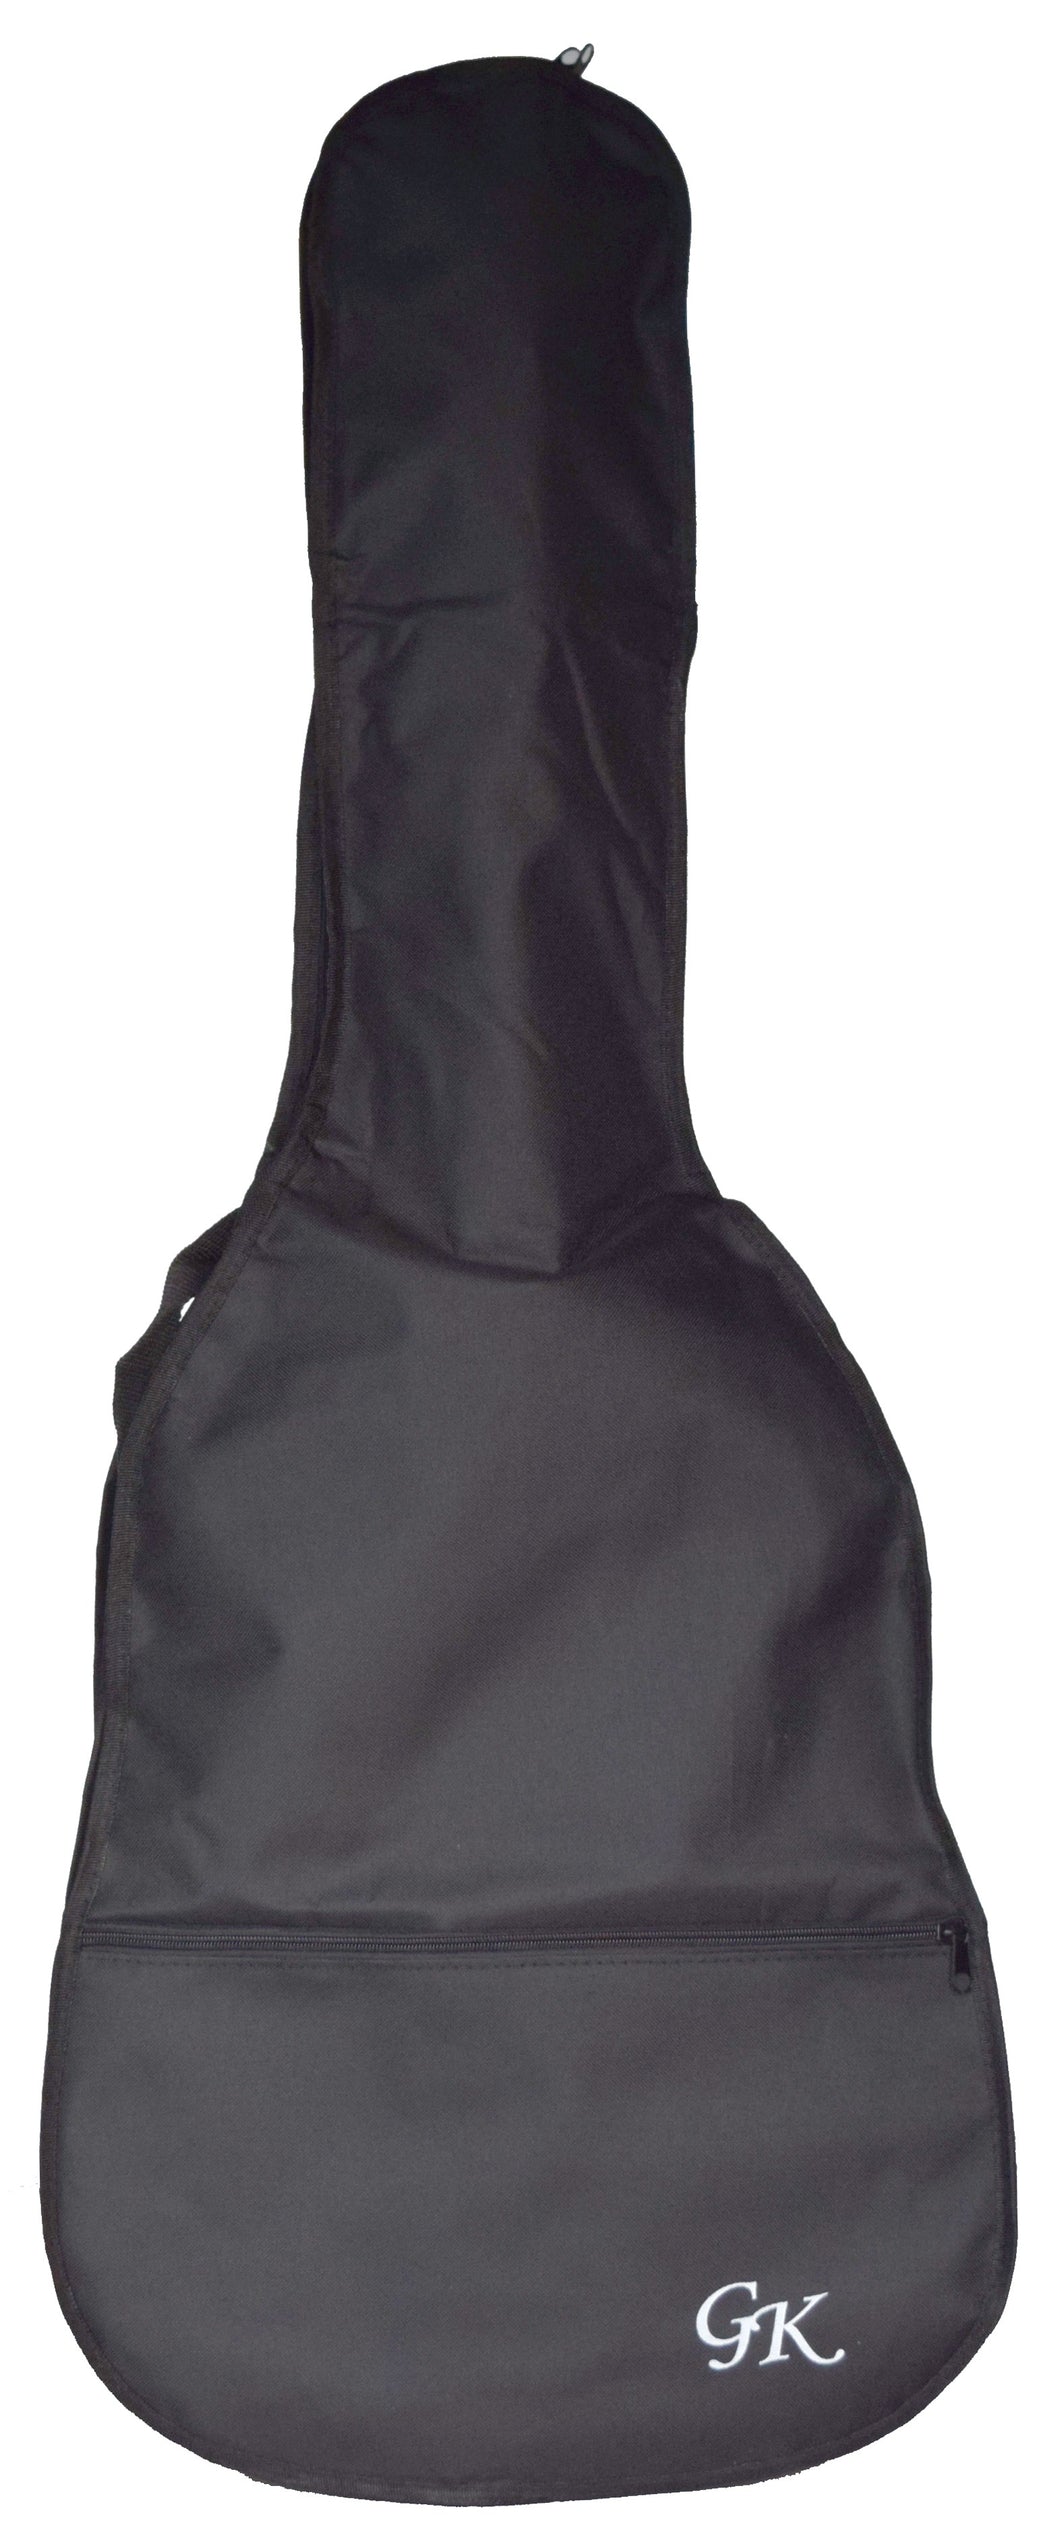 Carrying Bag With Back Pack Straps For Classical Guitar Full Size